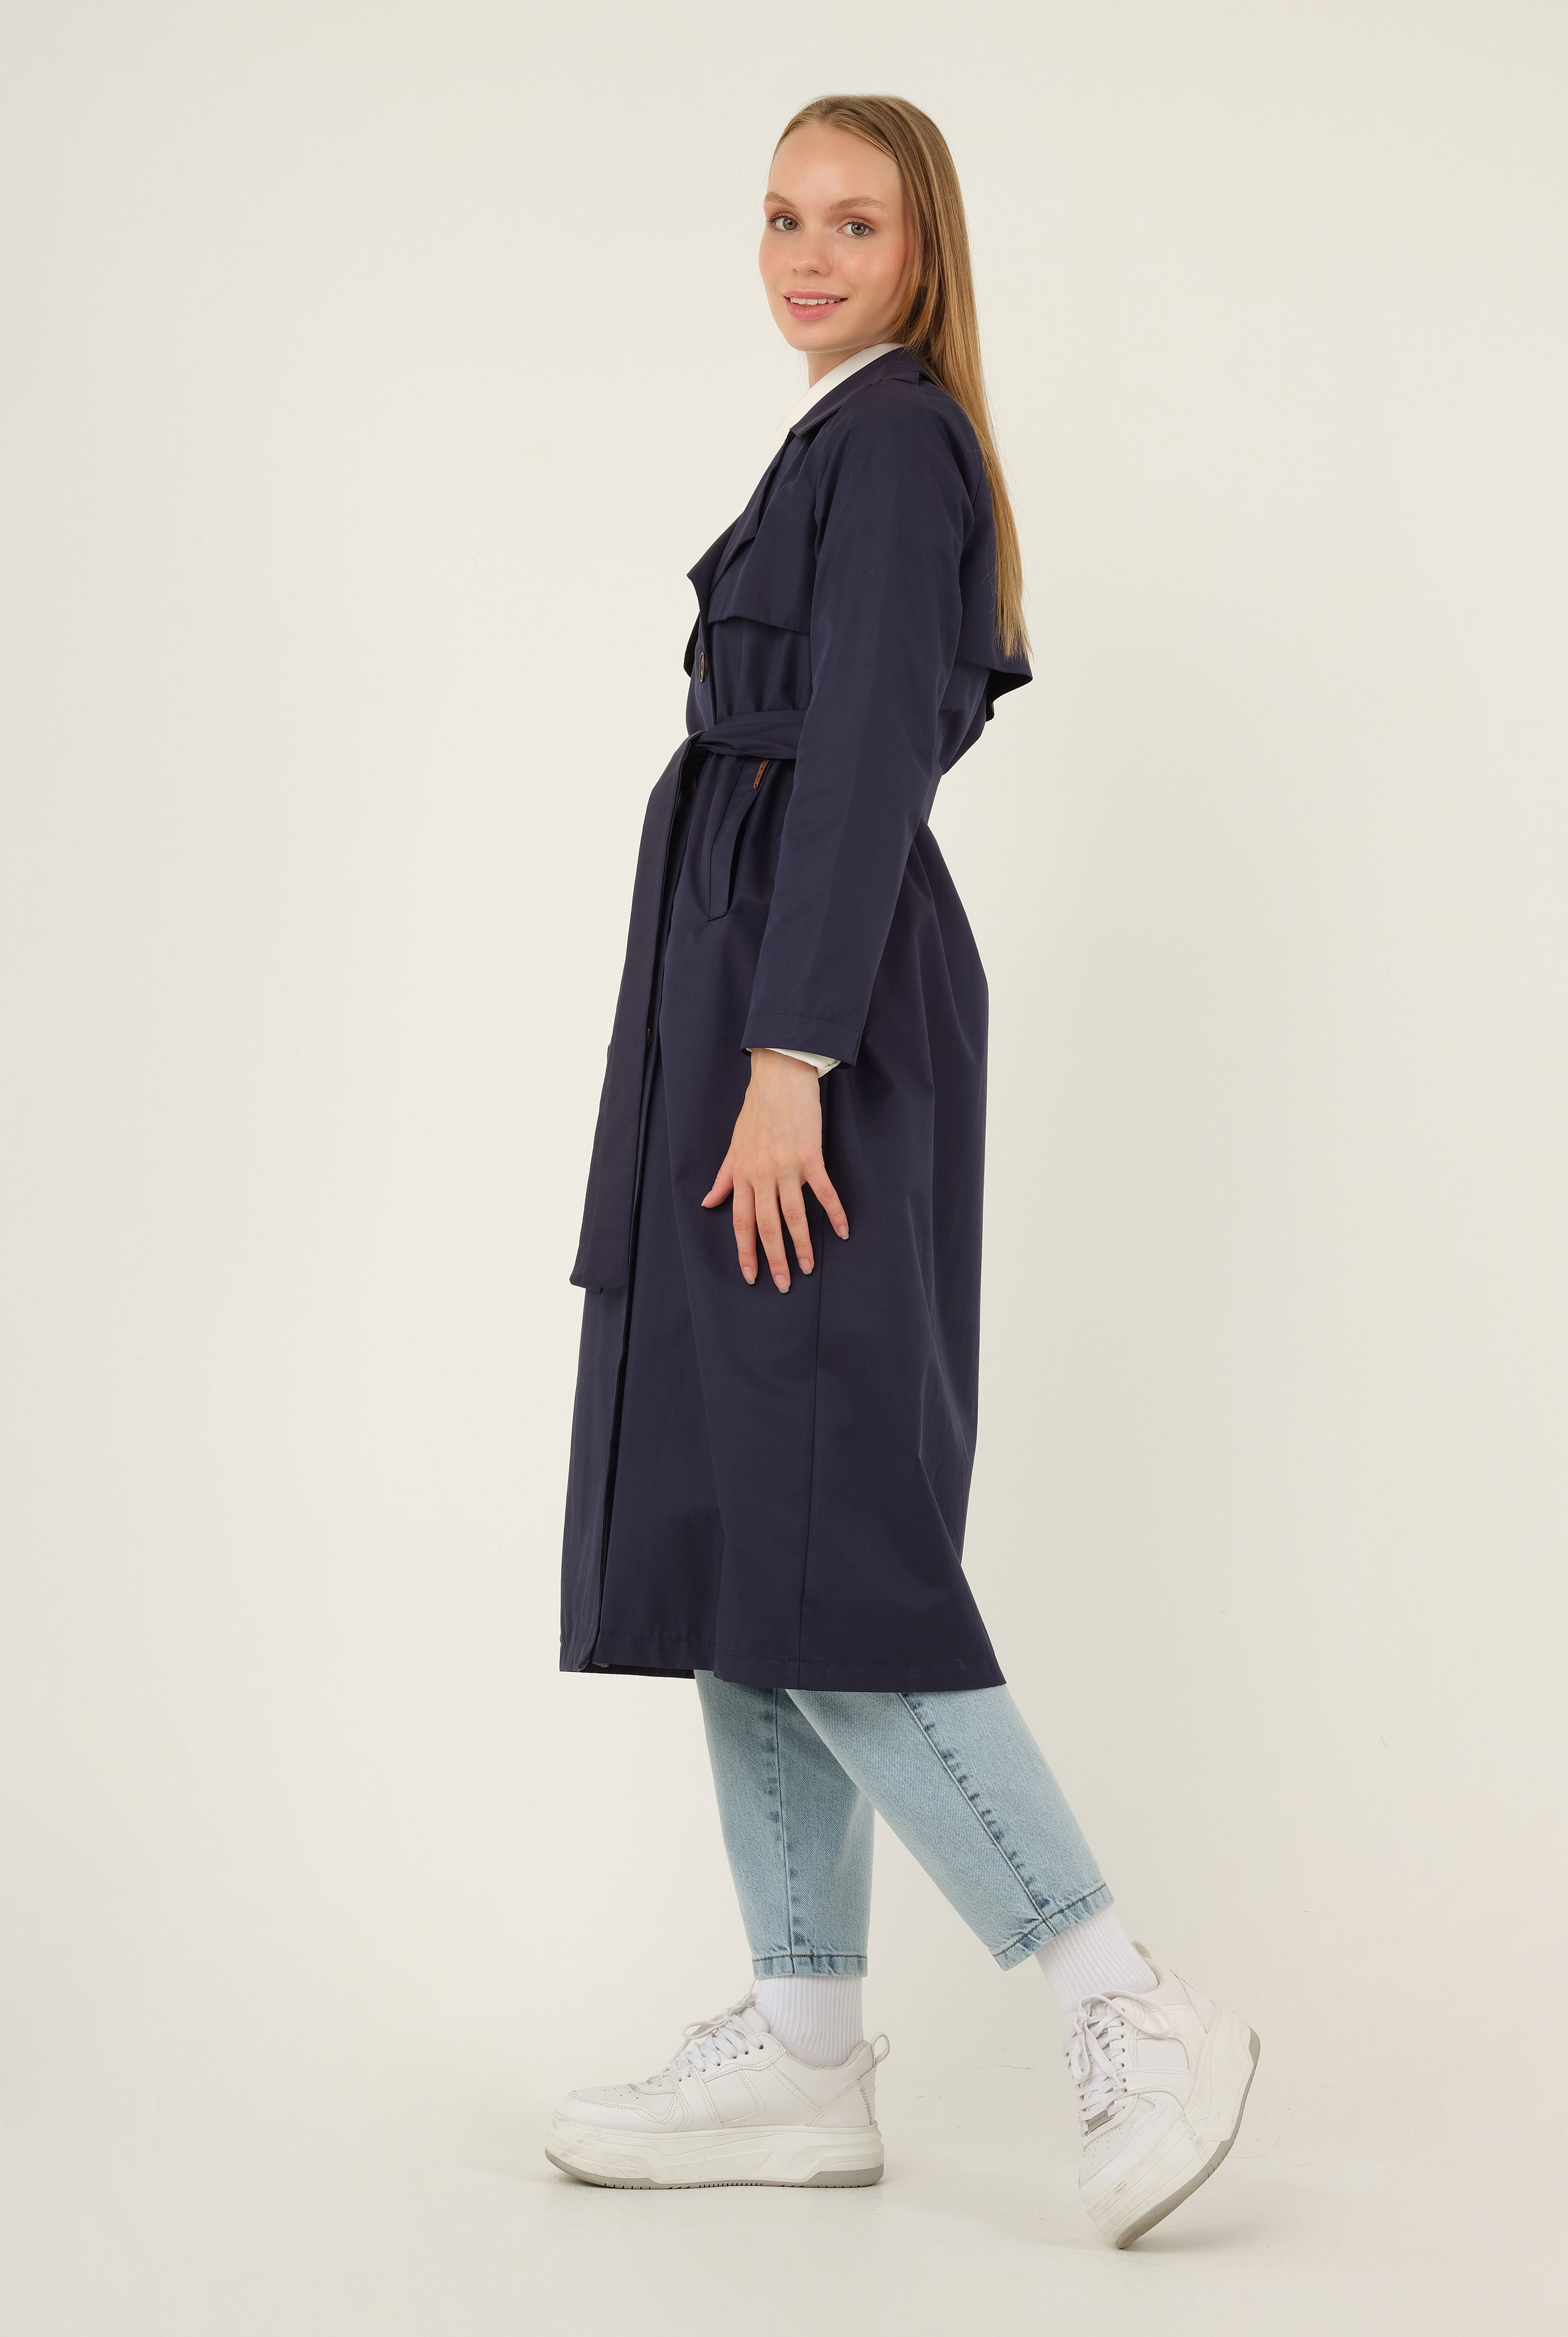 Past Trench Coat Navy Blue 